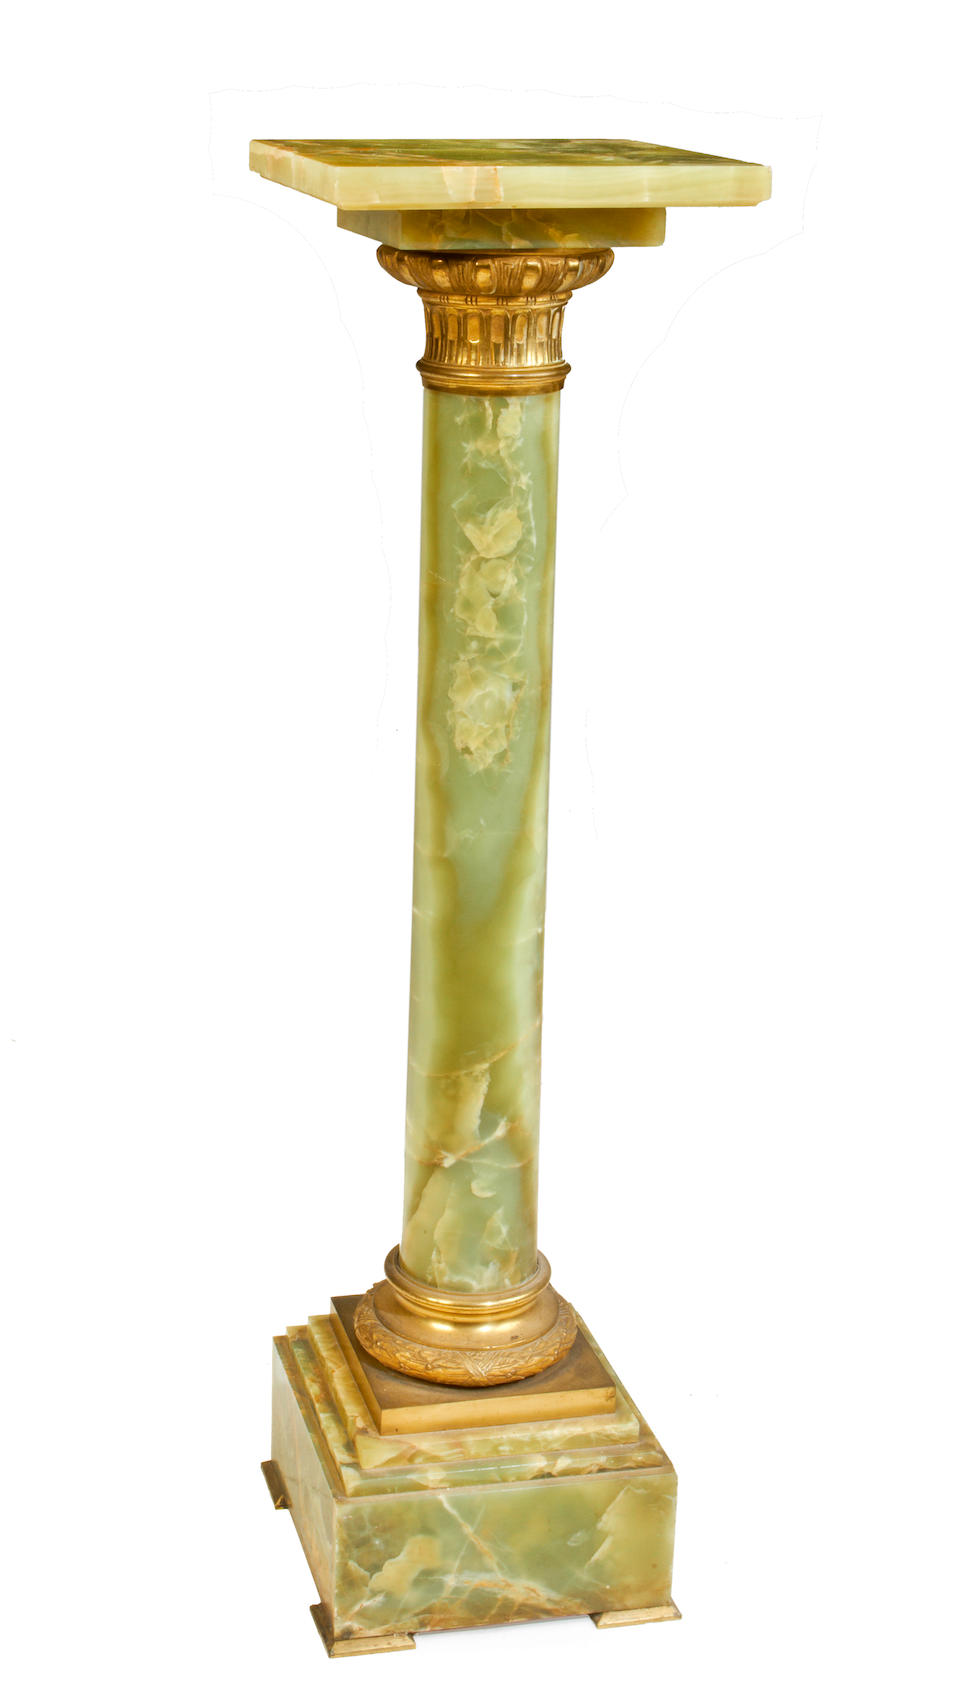 A late 19th/early 20th century green onyx and brass mounted pedestal column